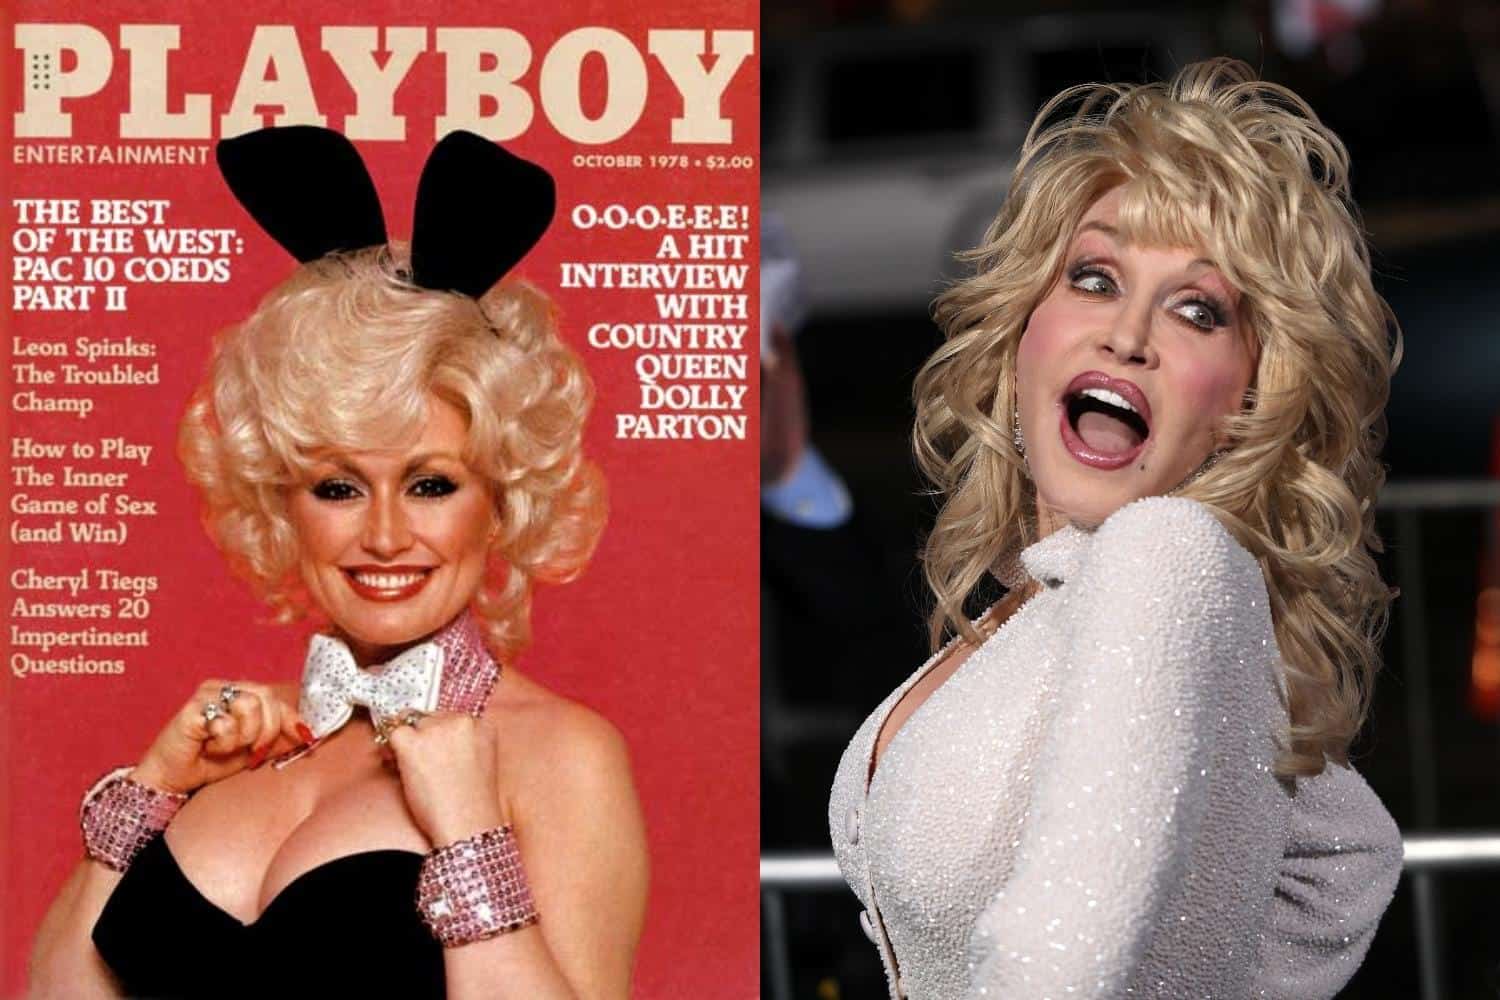 Dolly Parton might soon be working 9 to 5 on the set of a Playboy photo sho...